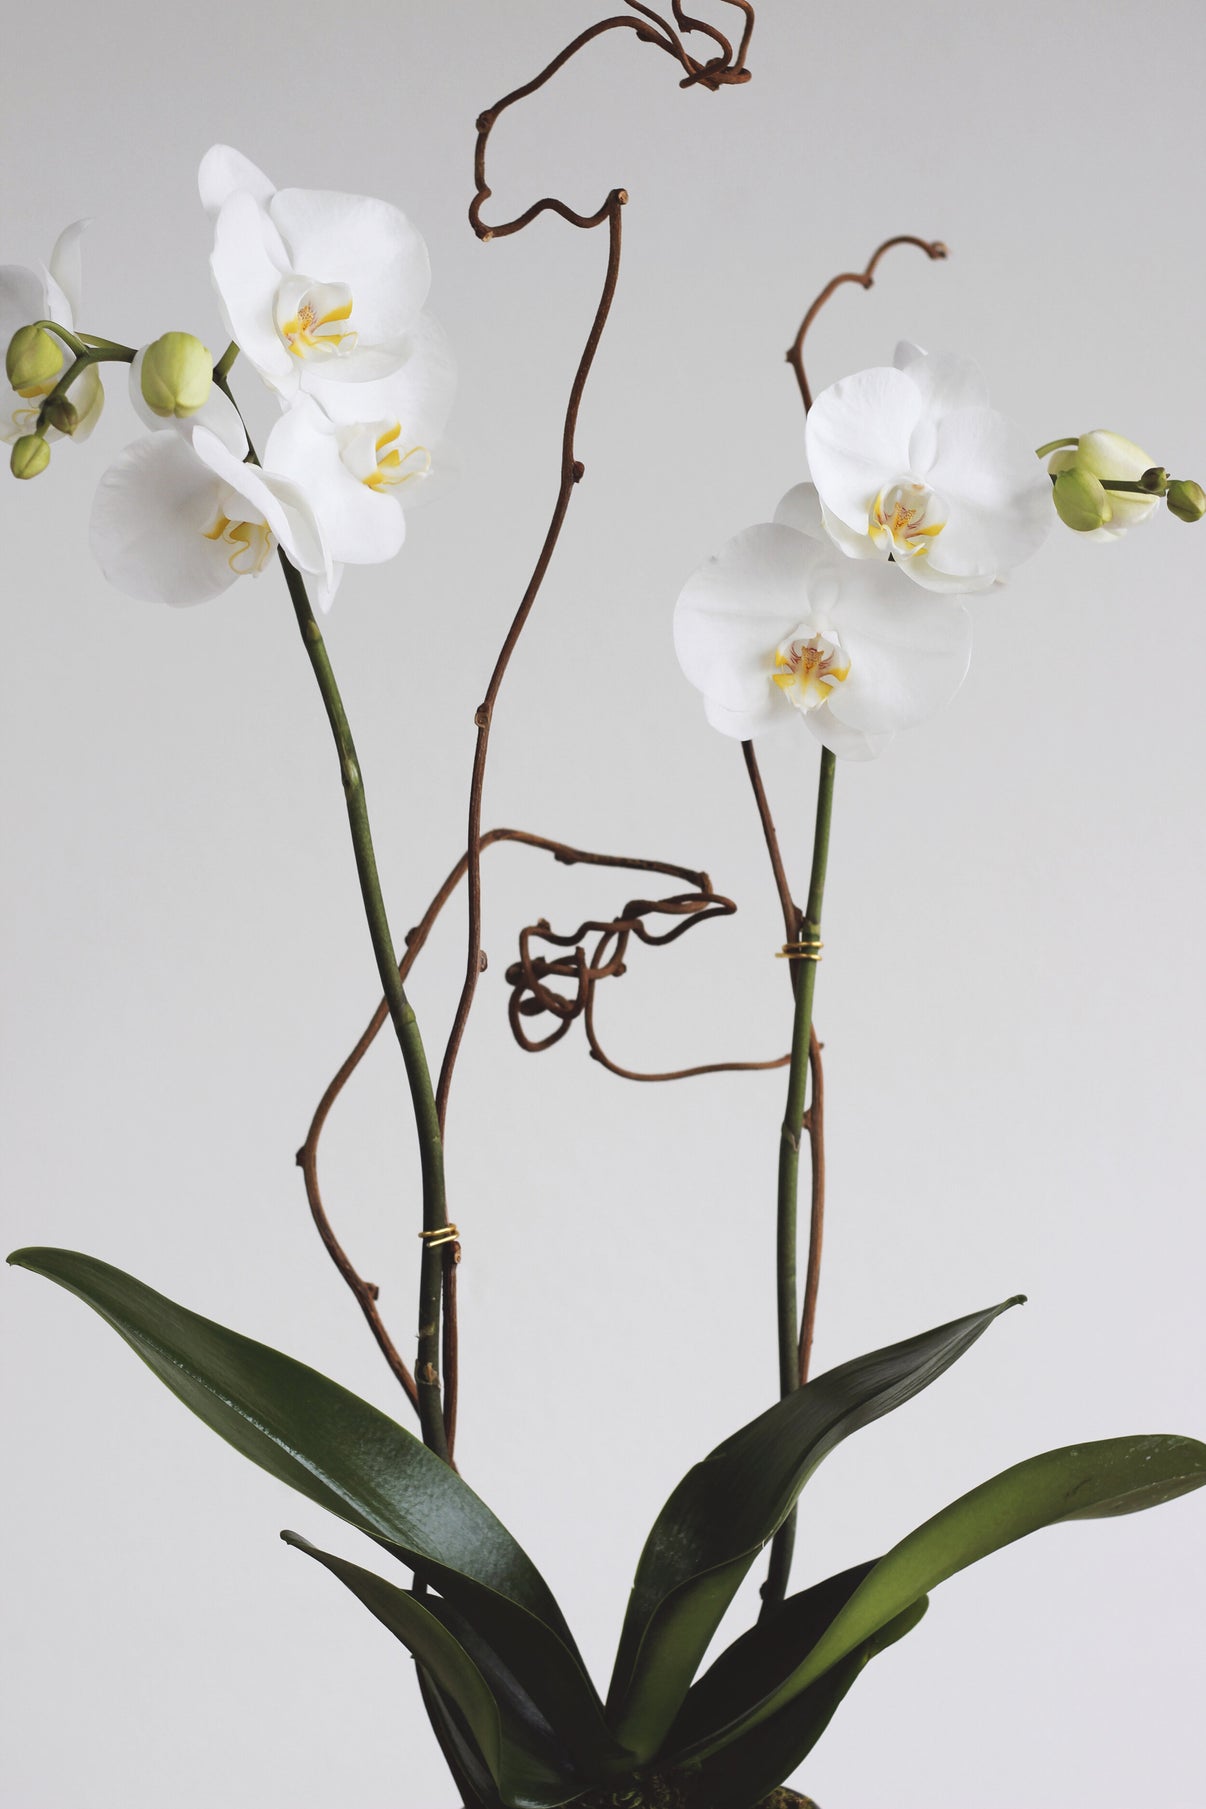 Living Orchid Subscription